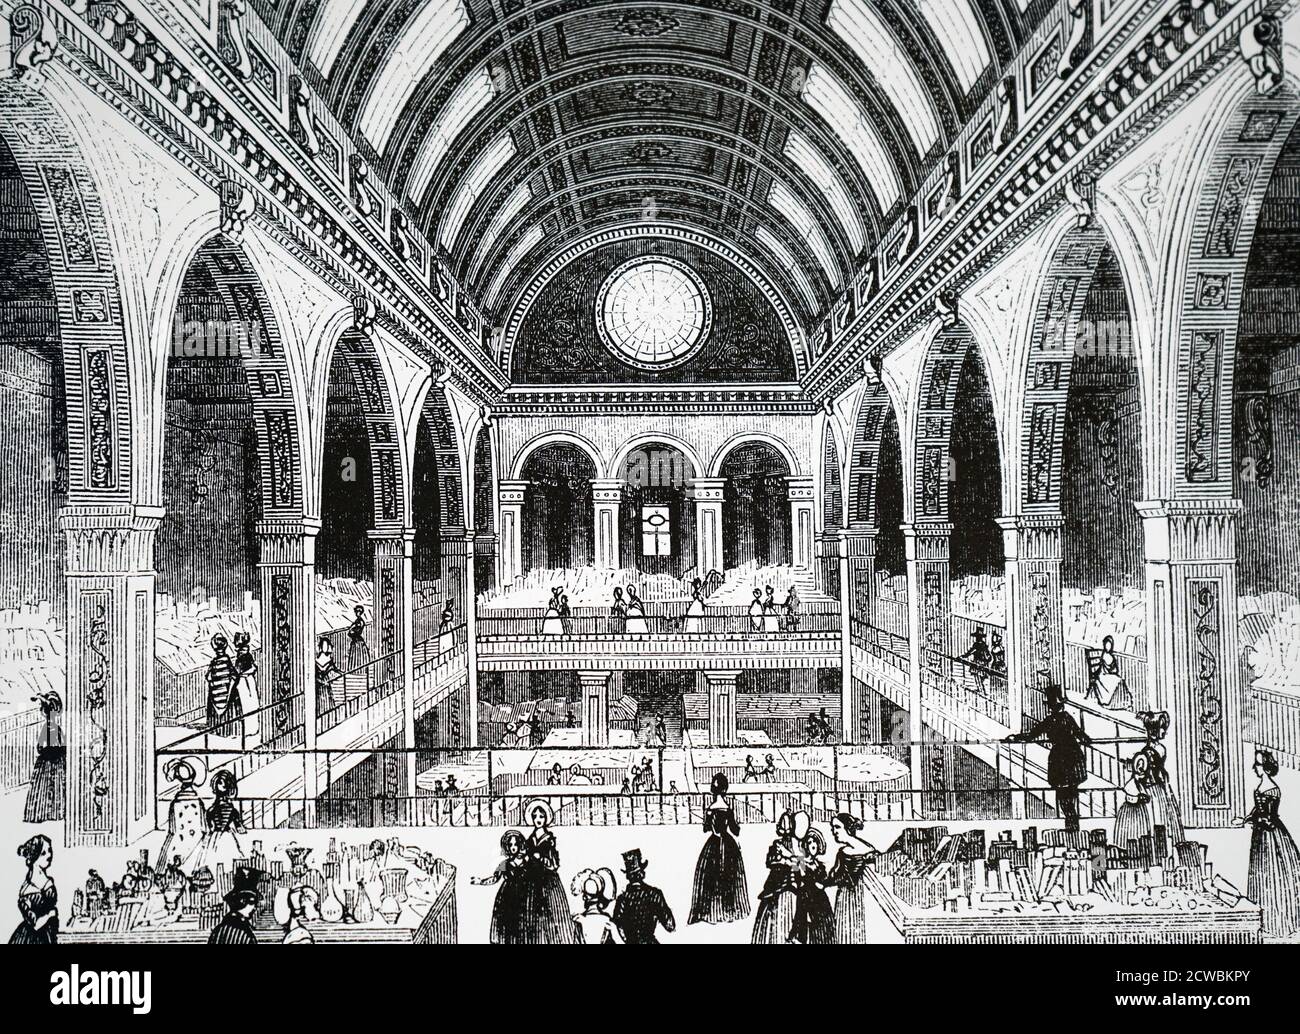 Engraving depicting the Pantheon Bazaar, Oxford Street, London. The first floor was a picture gallery where items could be bought. The next floor, shown in the picture, had counters for millinery, lace, hosiery, cutlery, jewellery, toys, children's clothes, etc. Each counter had a young female assistant. Stock Photo